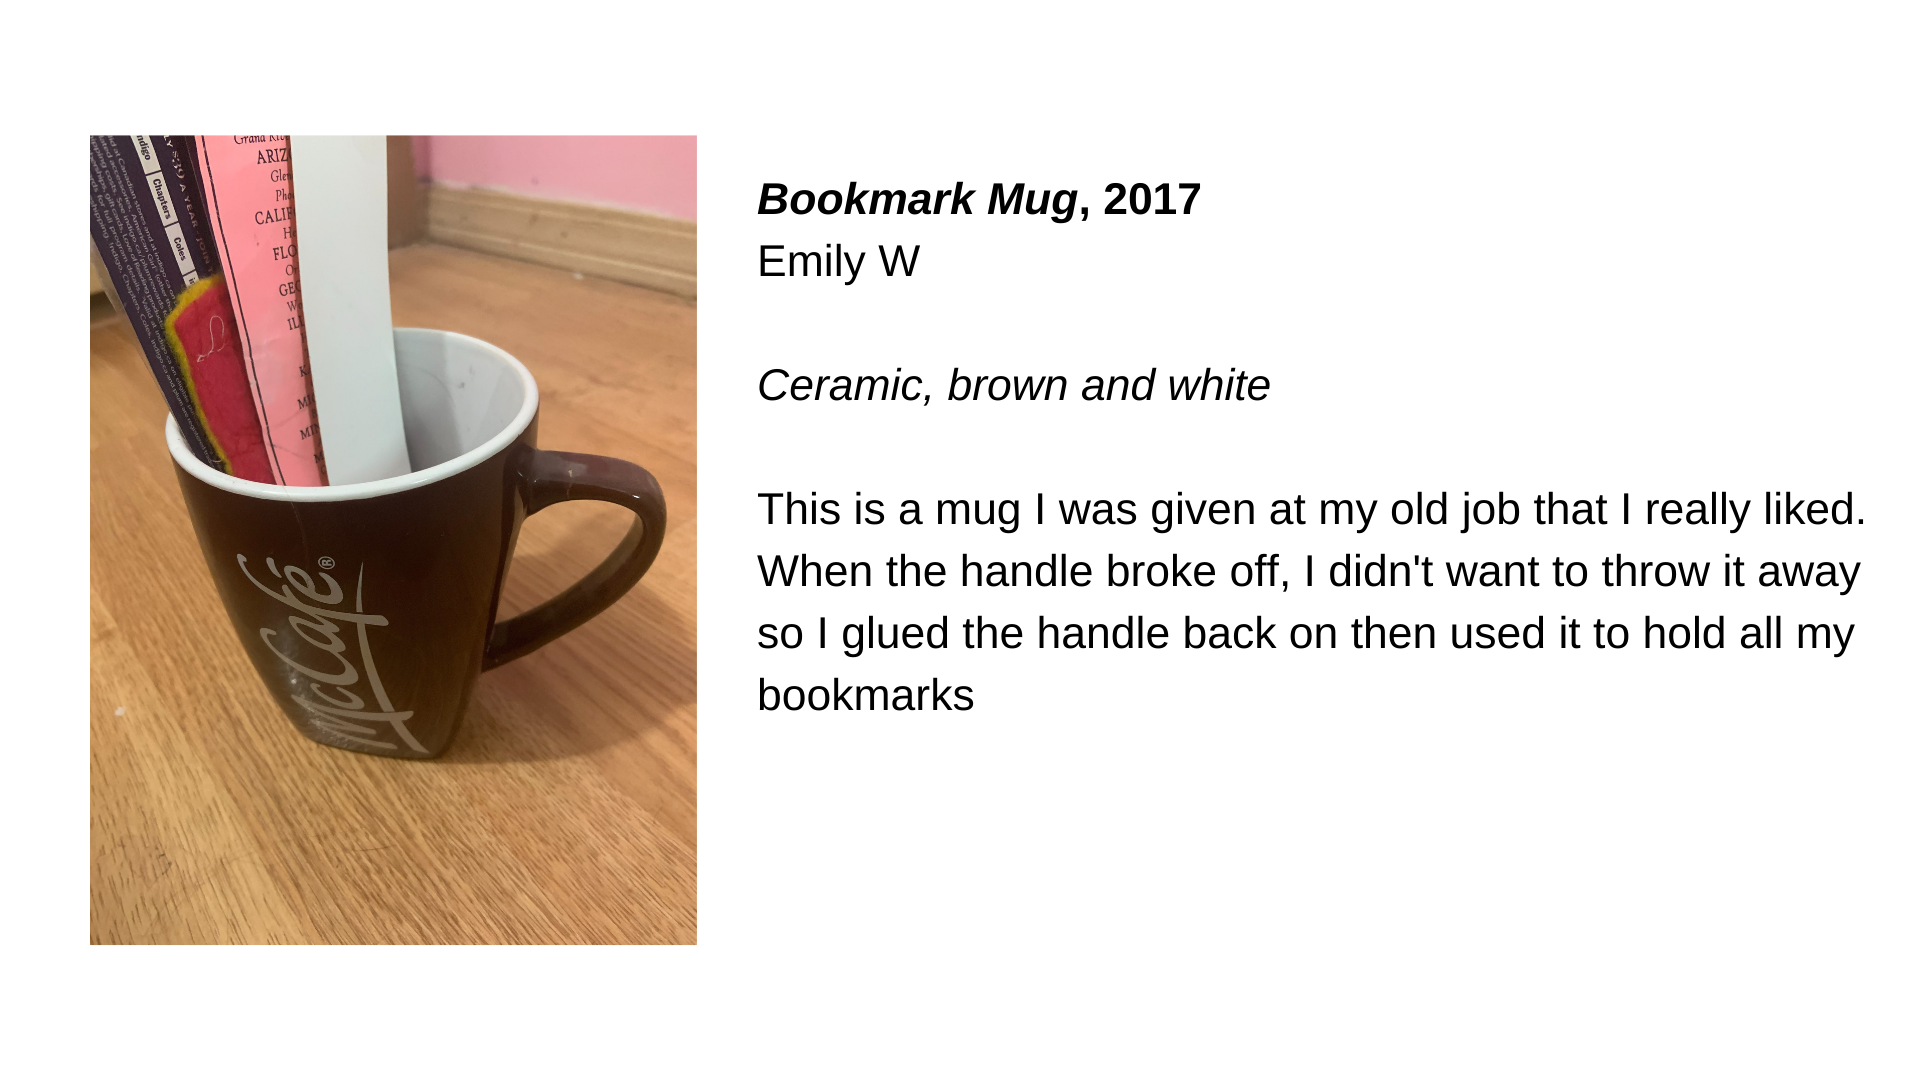  A brown mug with the word “McCafe” on it and bookmarks in it. Next to this image is the text “Bookmark Mug, 2017. Emily W. Ceramic, brown and white. This is a mug I was given at my old job that I really liked. When the handle broke off, I didn't wan